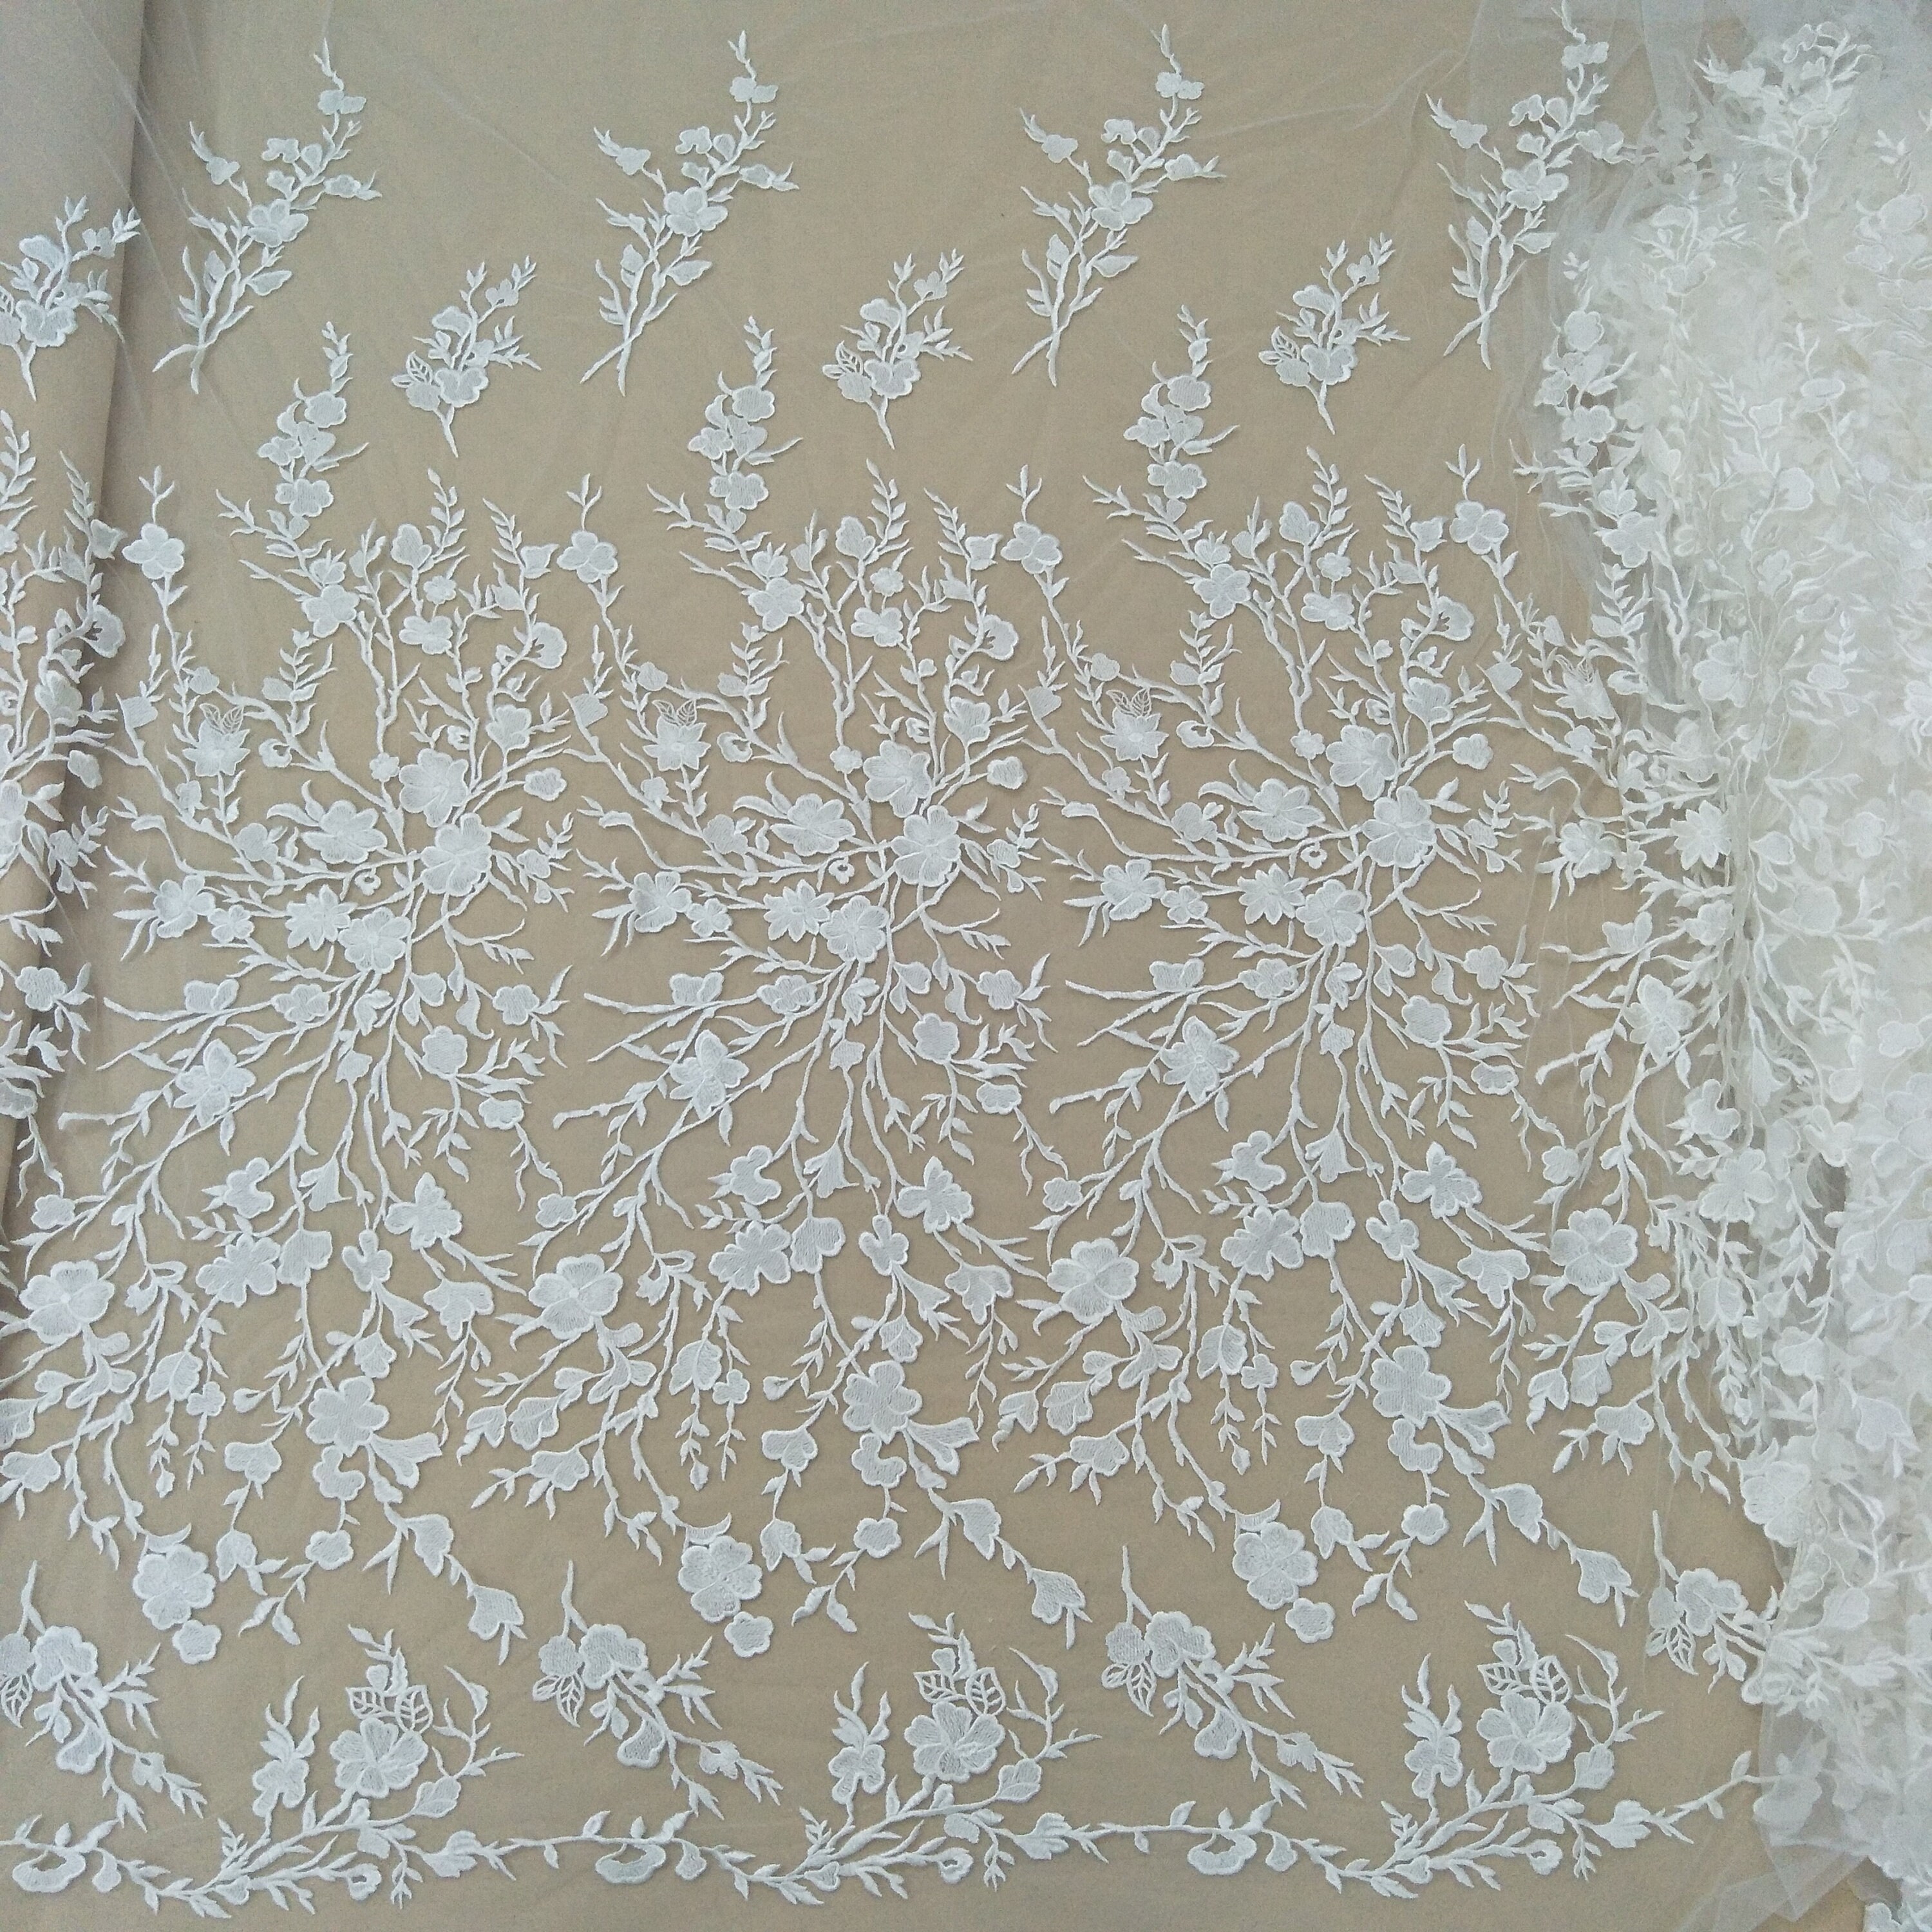 Elegent Rayon embroidery lace fabric organza ivory French lace | Etsy